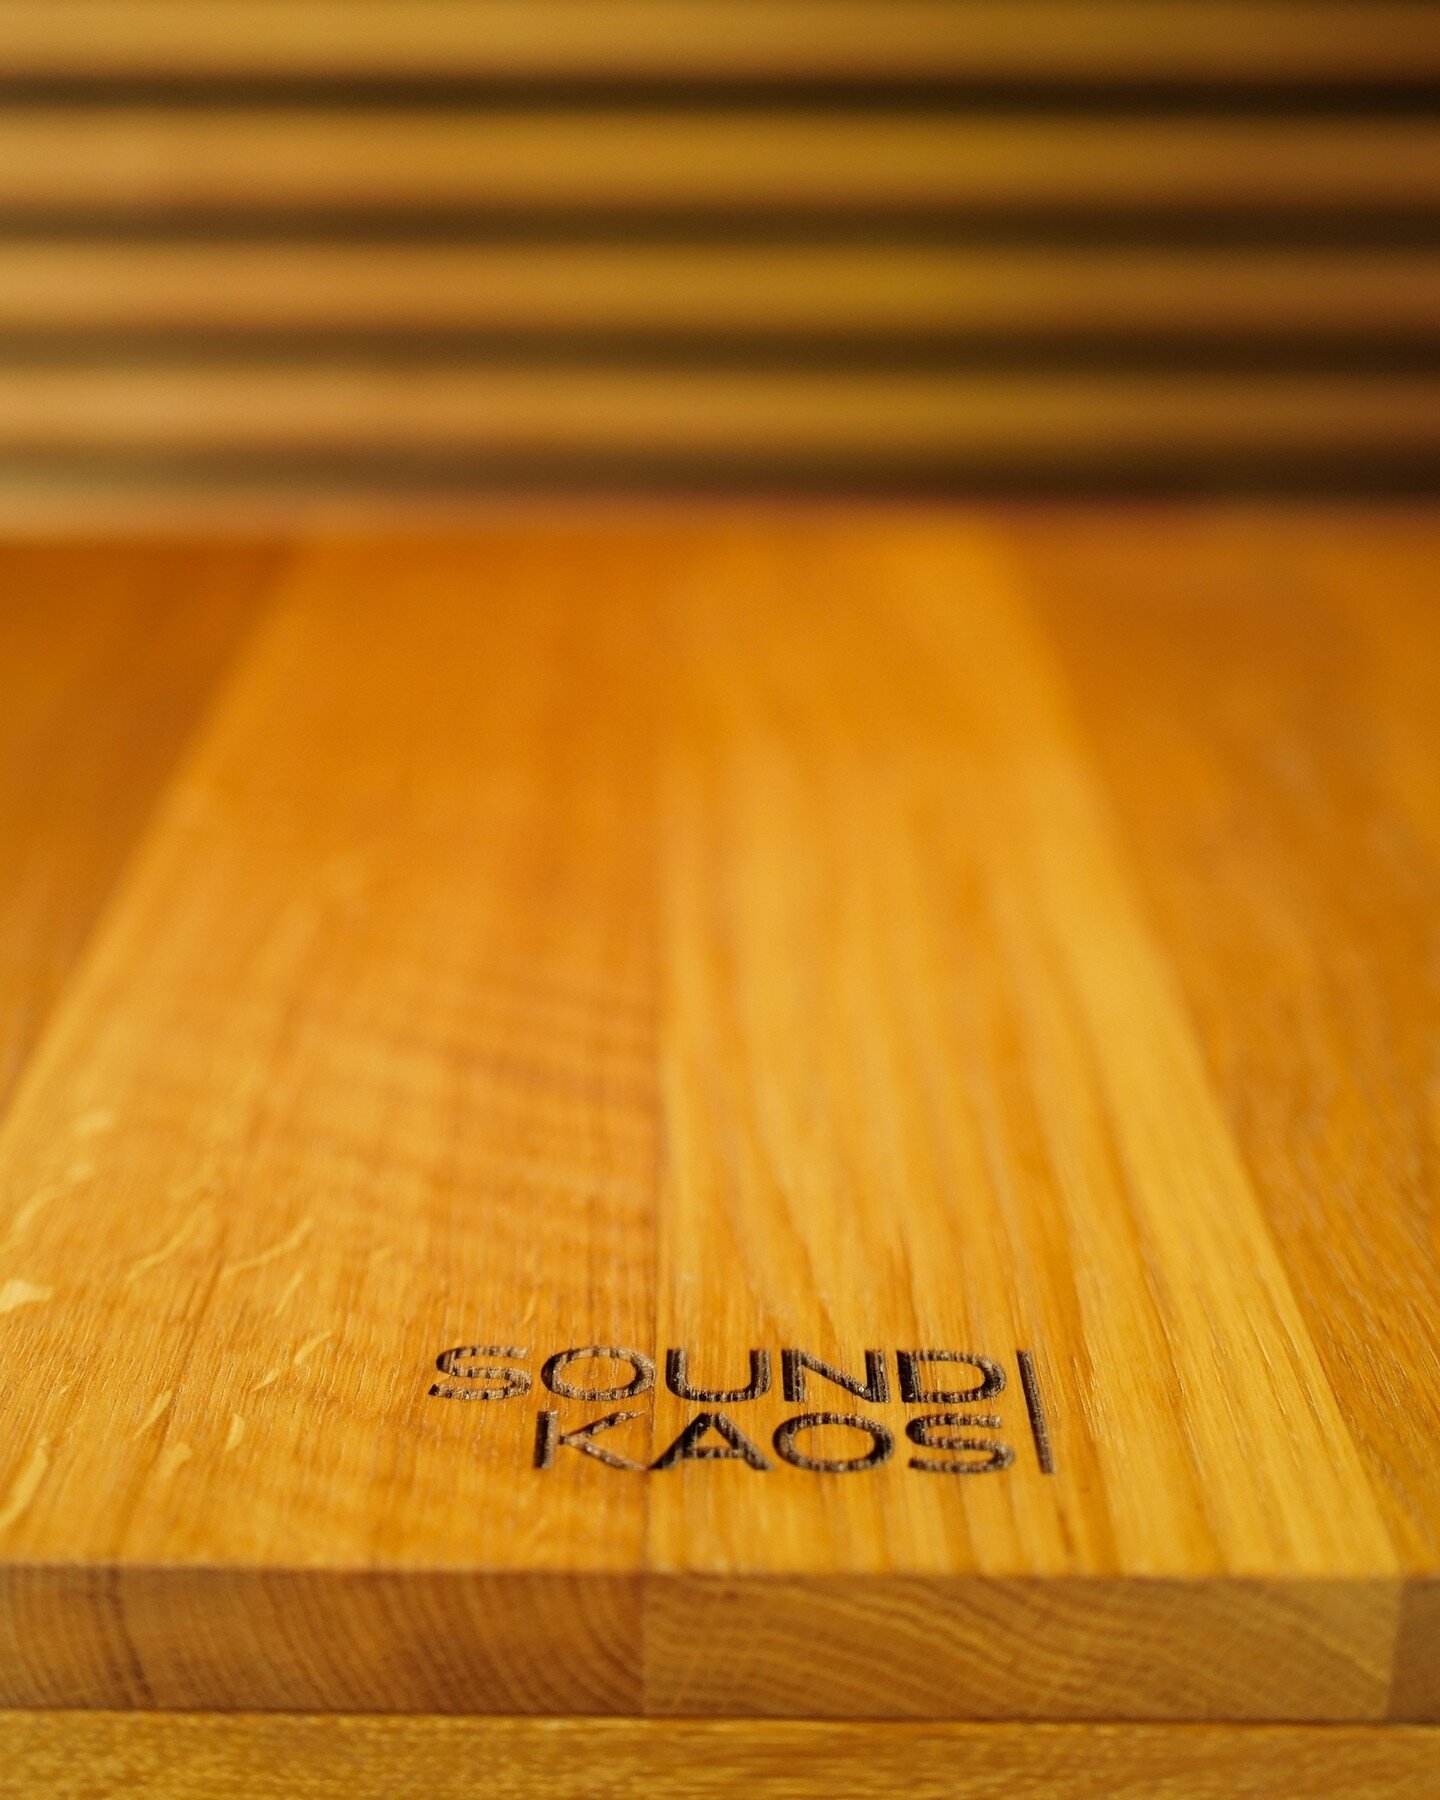 Zooming in on Gravitas, where craftsmanship meets resonance in every intricate wood grain. Feel the bass, see the detail. ⁠
⁠
#SoundKaos #LoudSpeakers #HiFi #HiFiAudio #HiFiSound #Switzerland #Music⁠